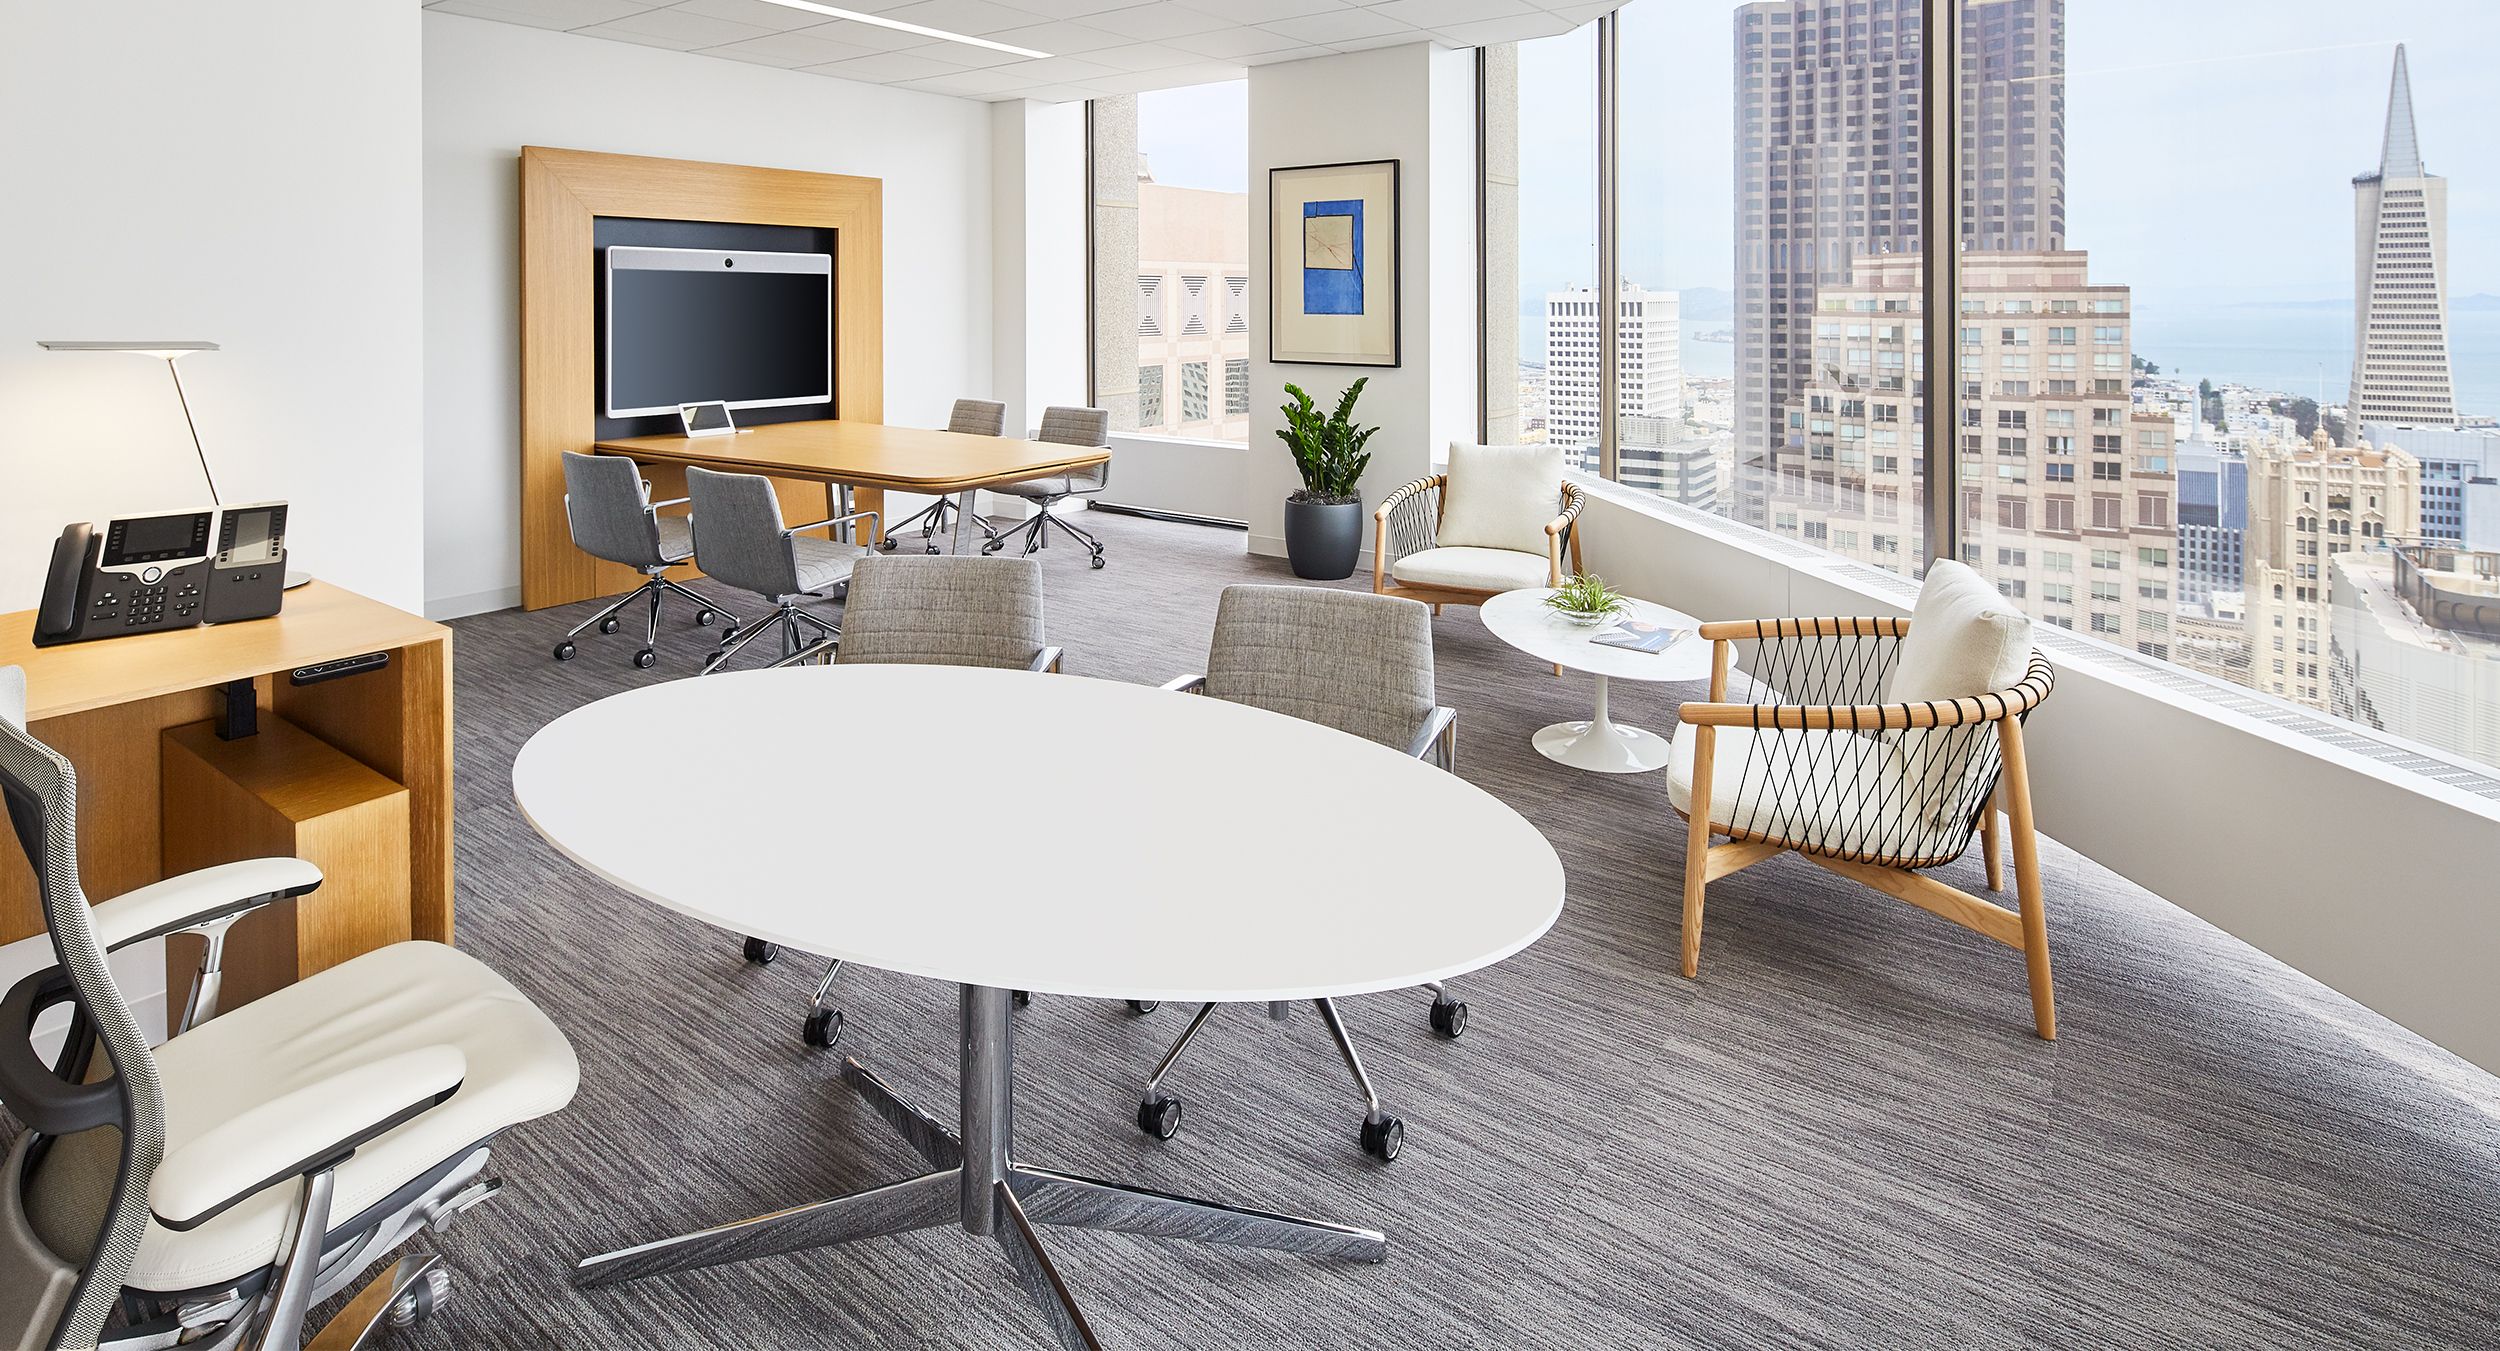 This SESSIONS elliptical table features a Modern White Corian® surface and a MESA media wall is finished in Rift White Oak and Polished Chrome.